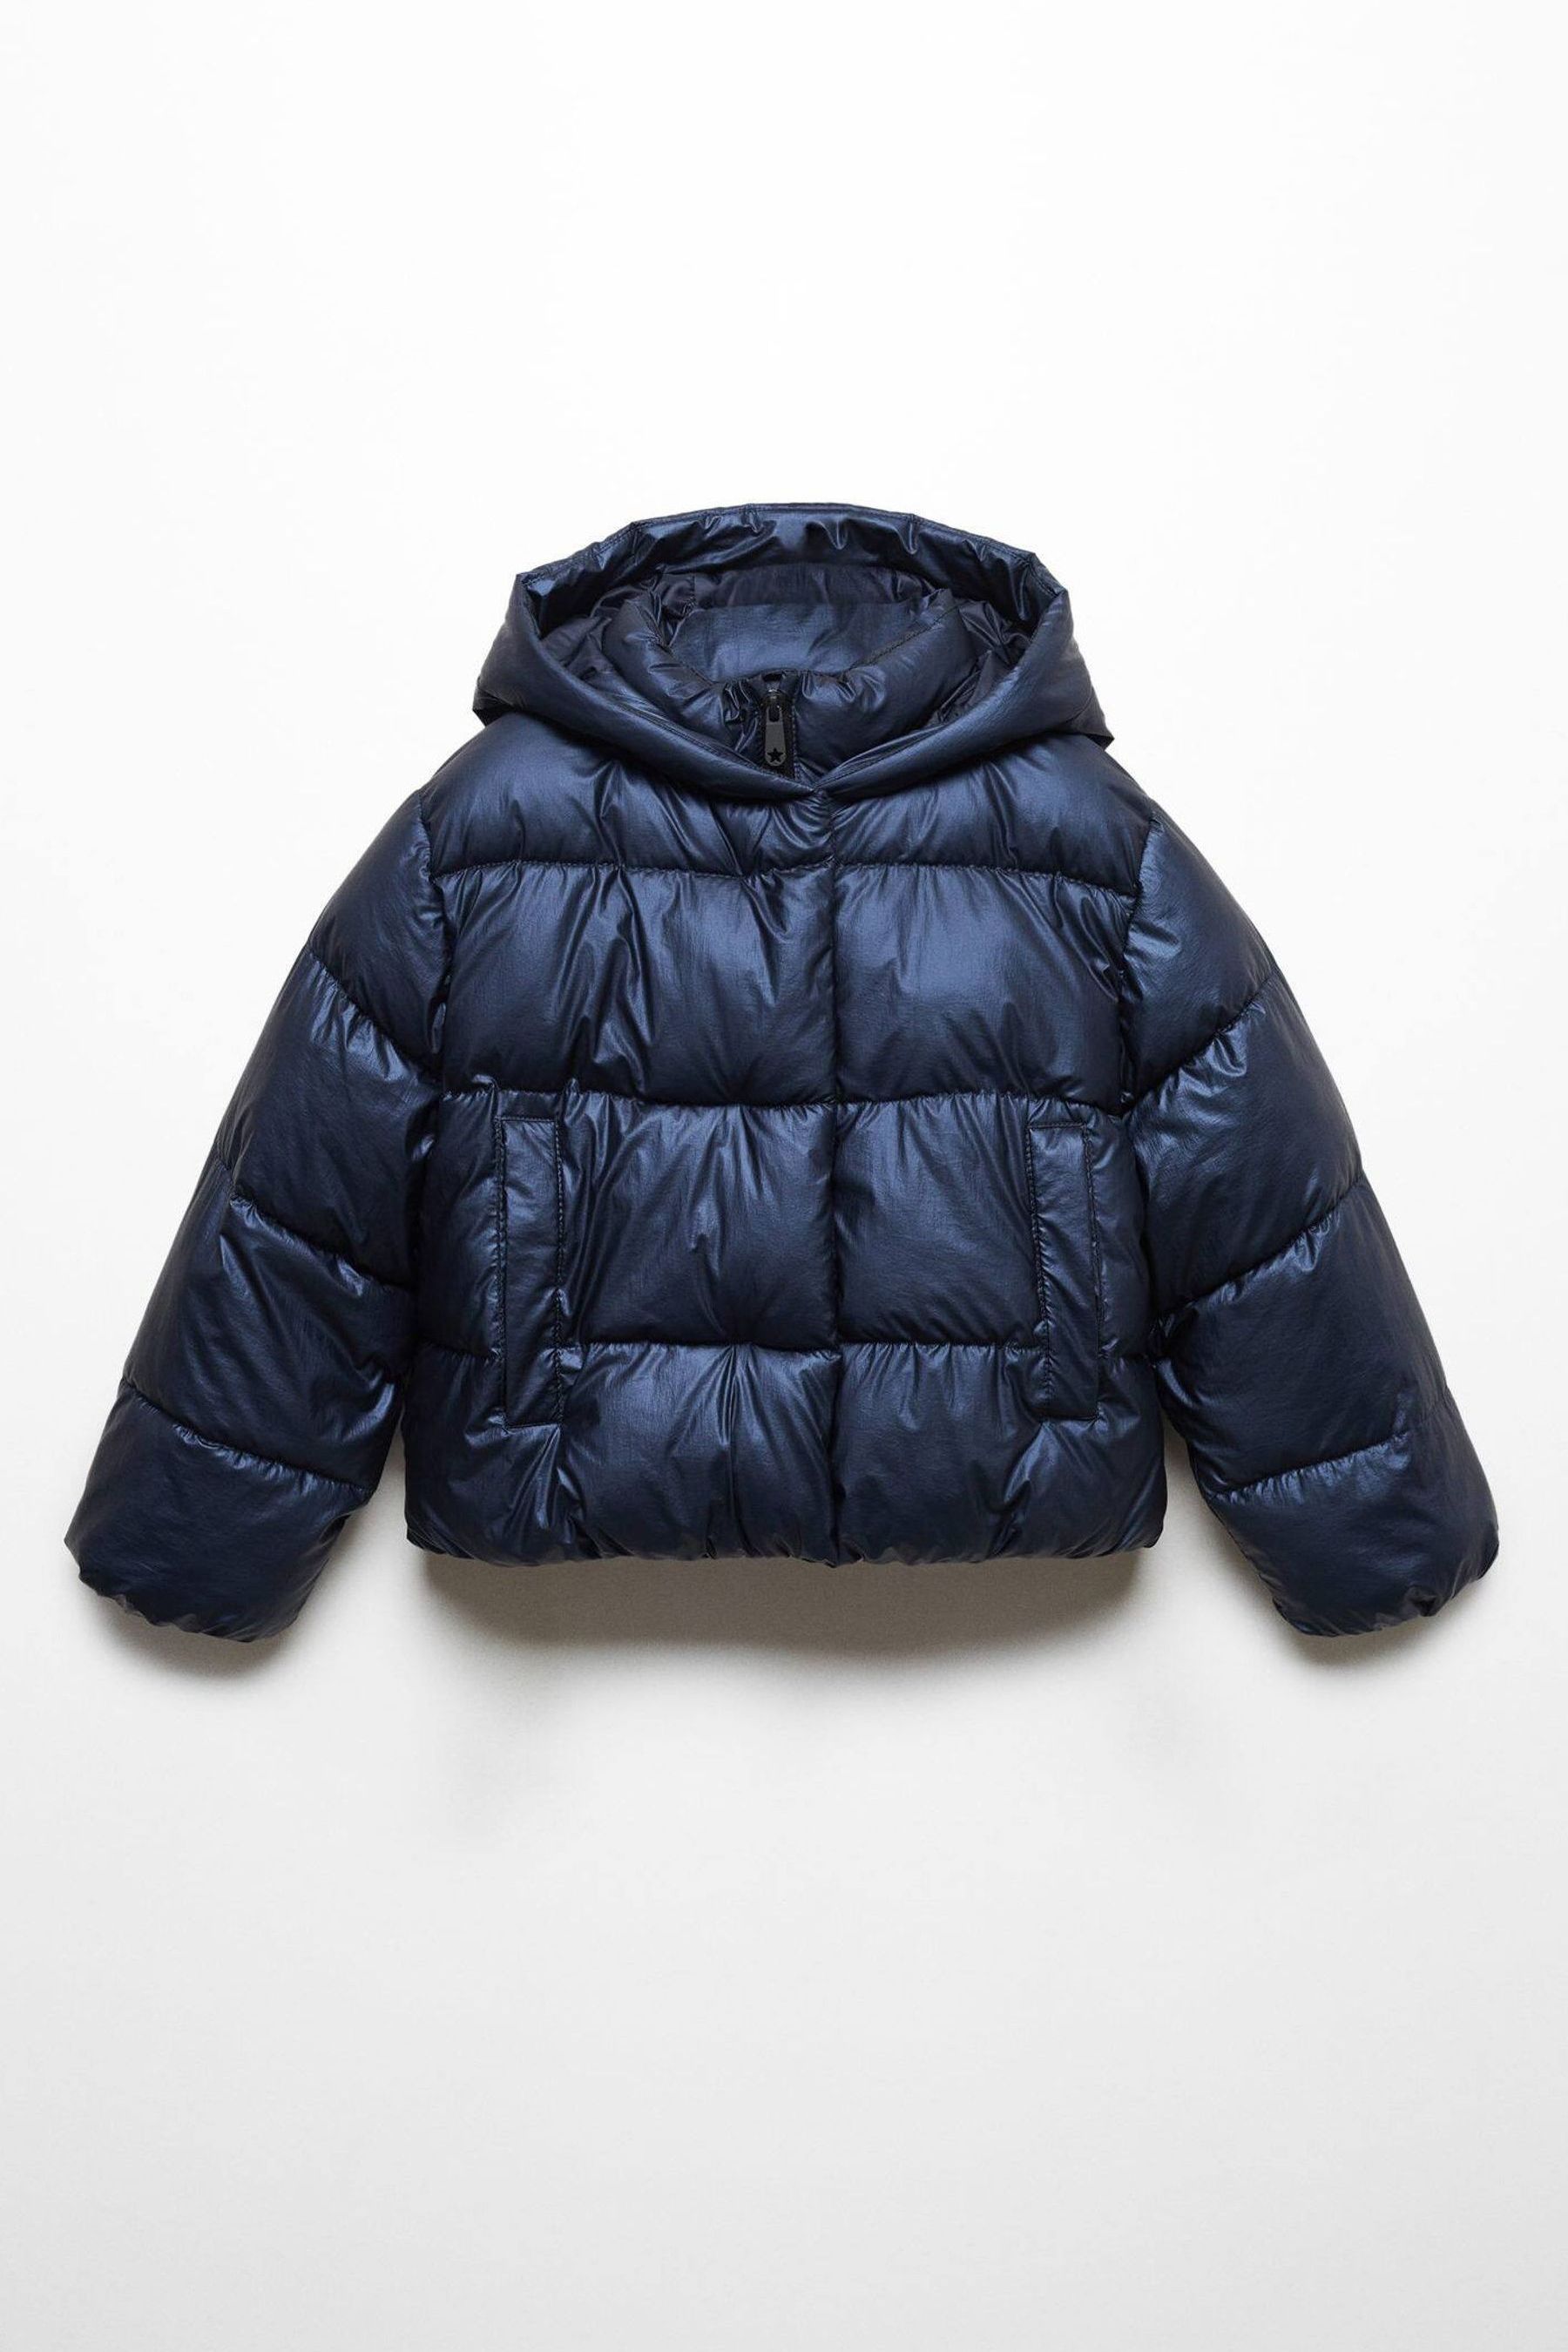 Buy Mango Blue Hood Quilted Puffer Coat from the Next UK online shop